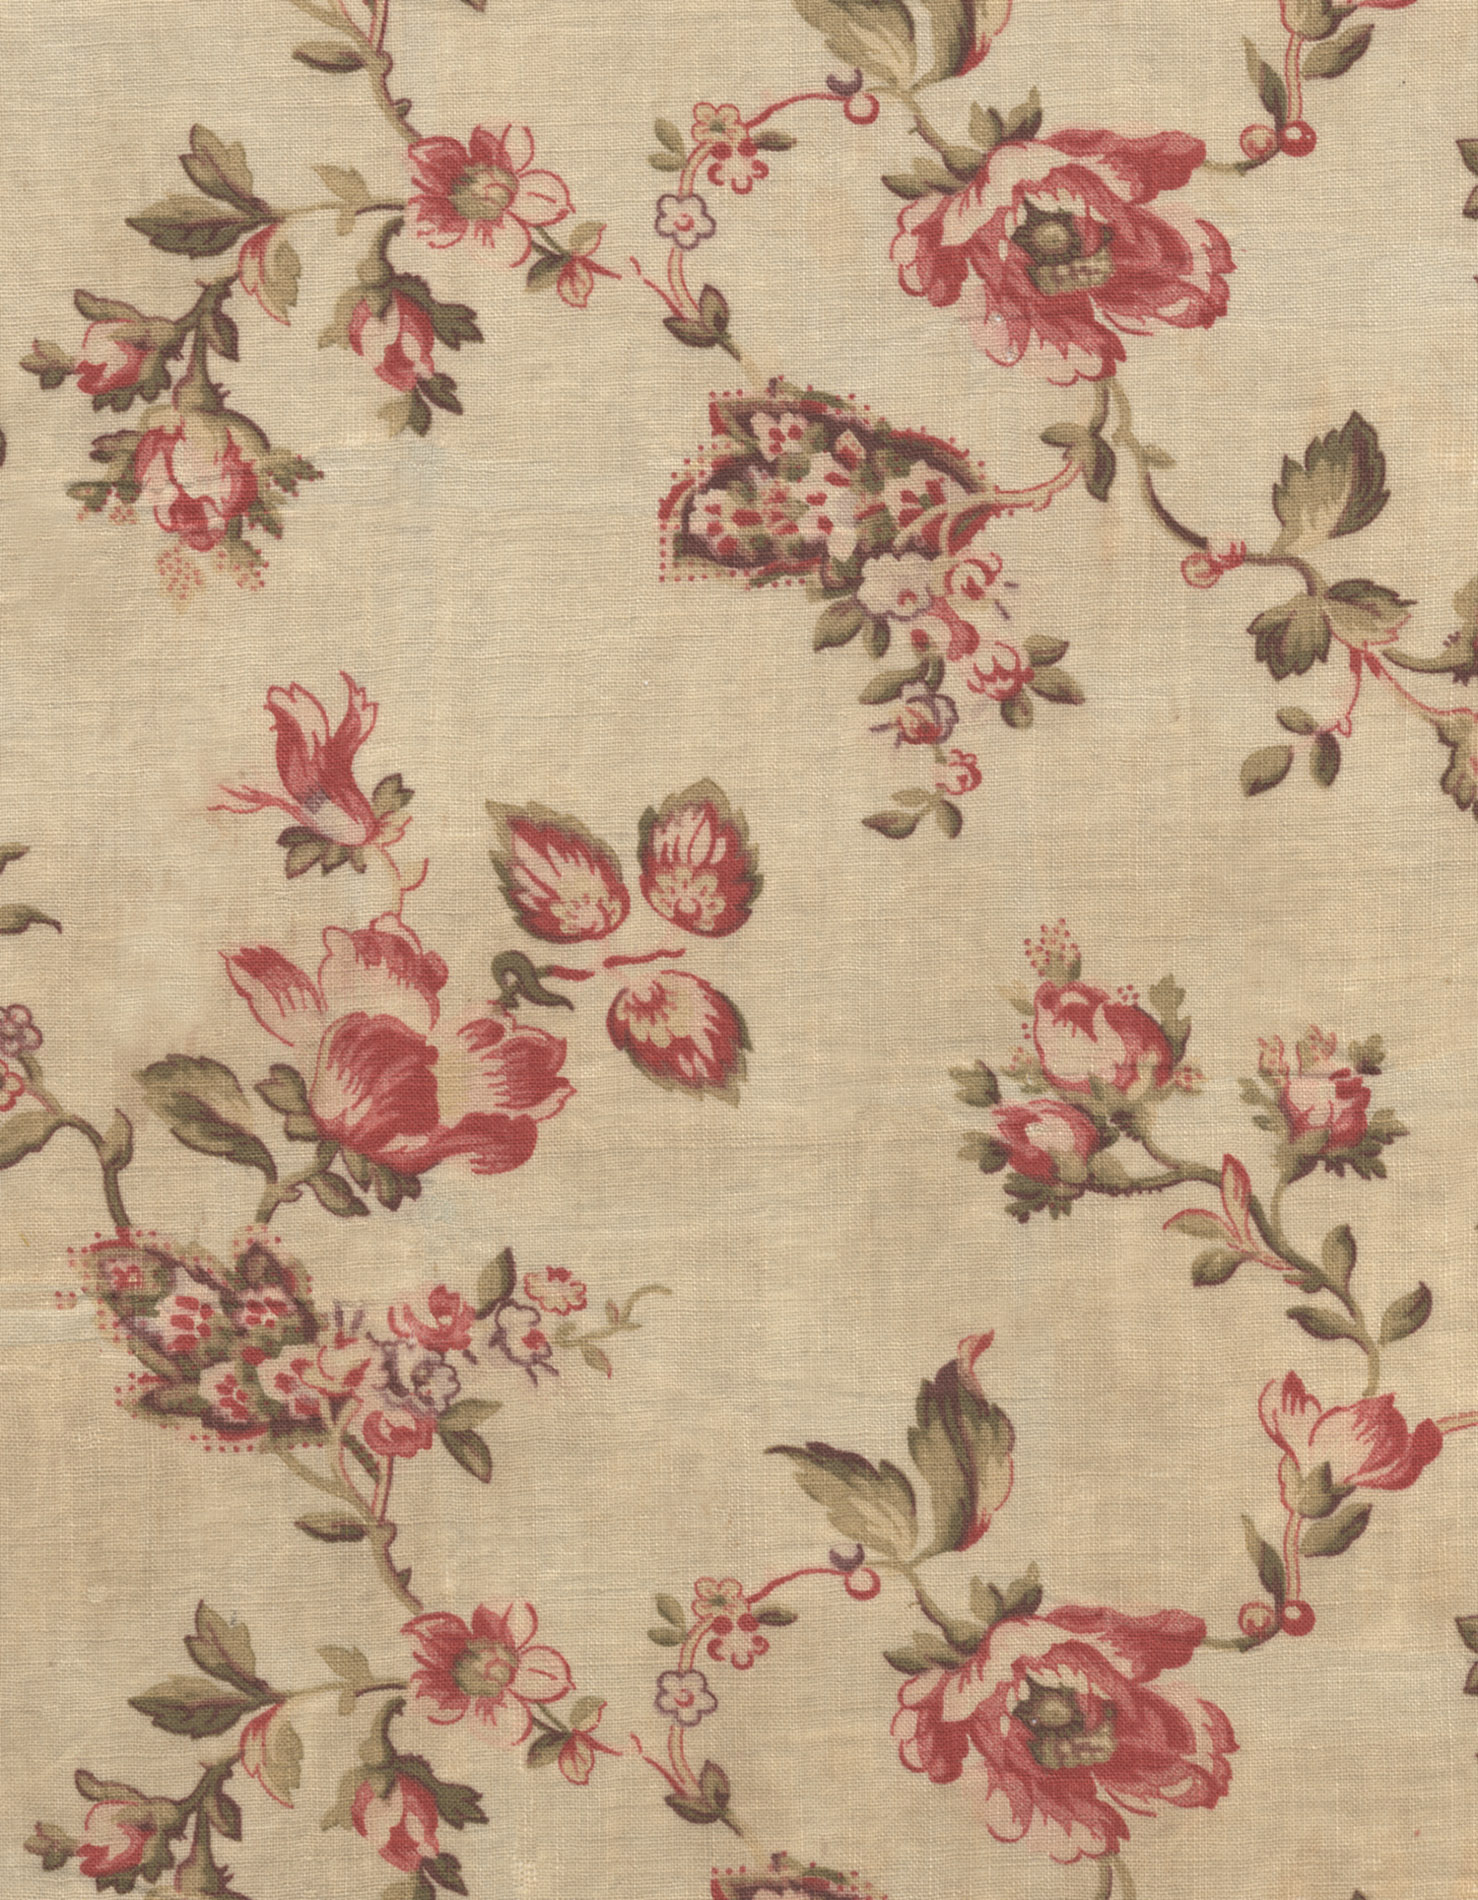 Vintage Flower Designs   All Wallpapers New